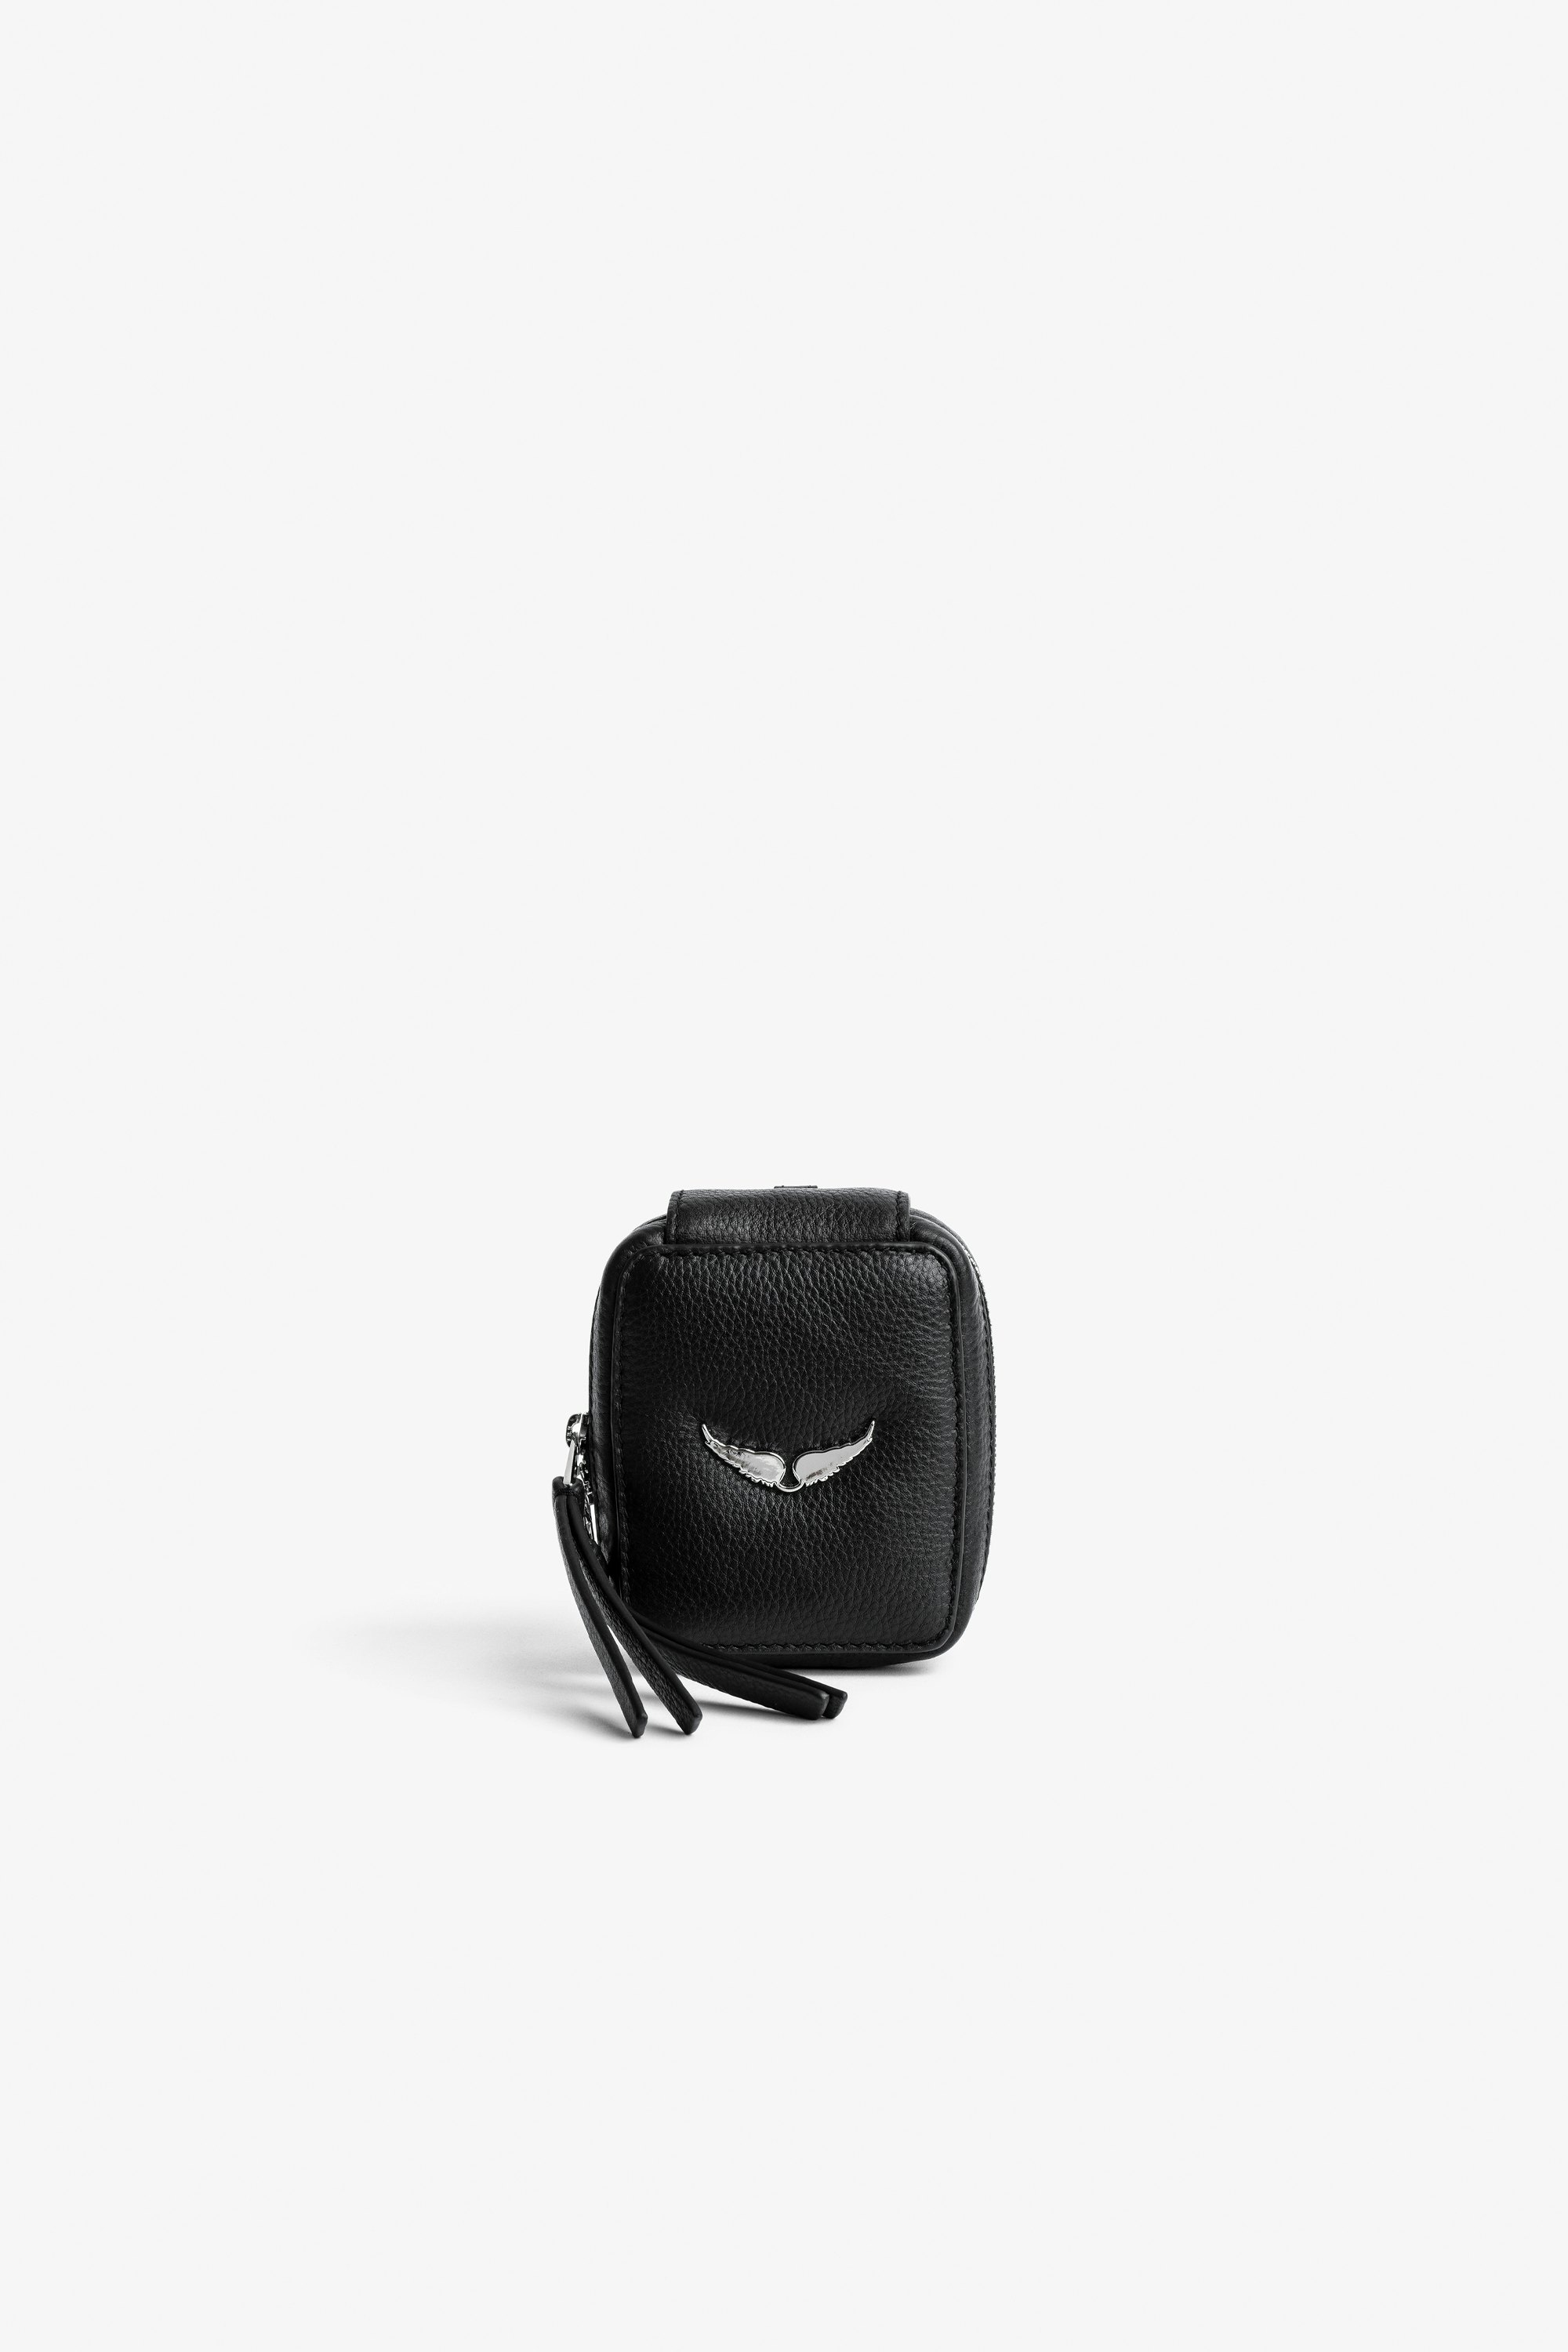 Swing Your Wings clutch Women’s black grained leather clutch with Swing Your Wings charm.